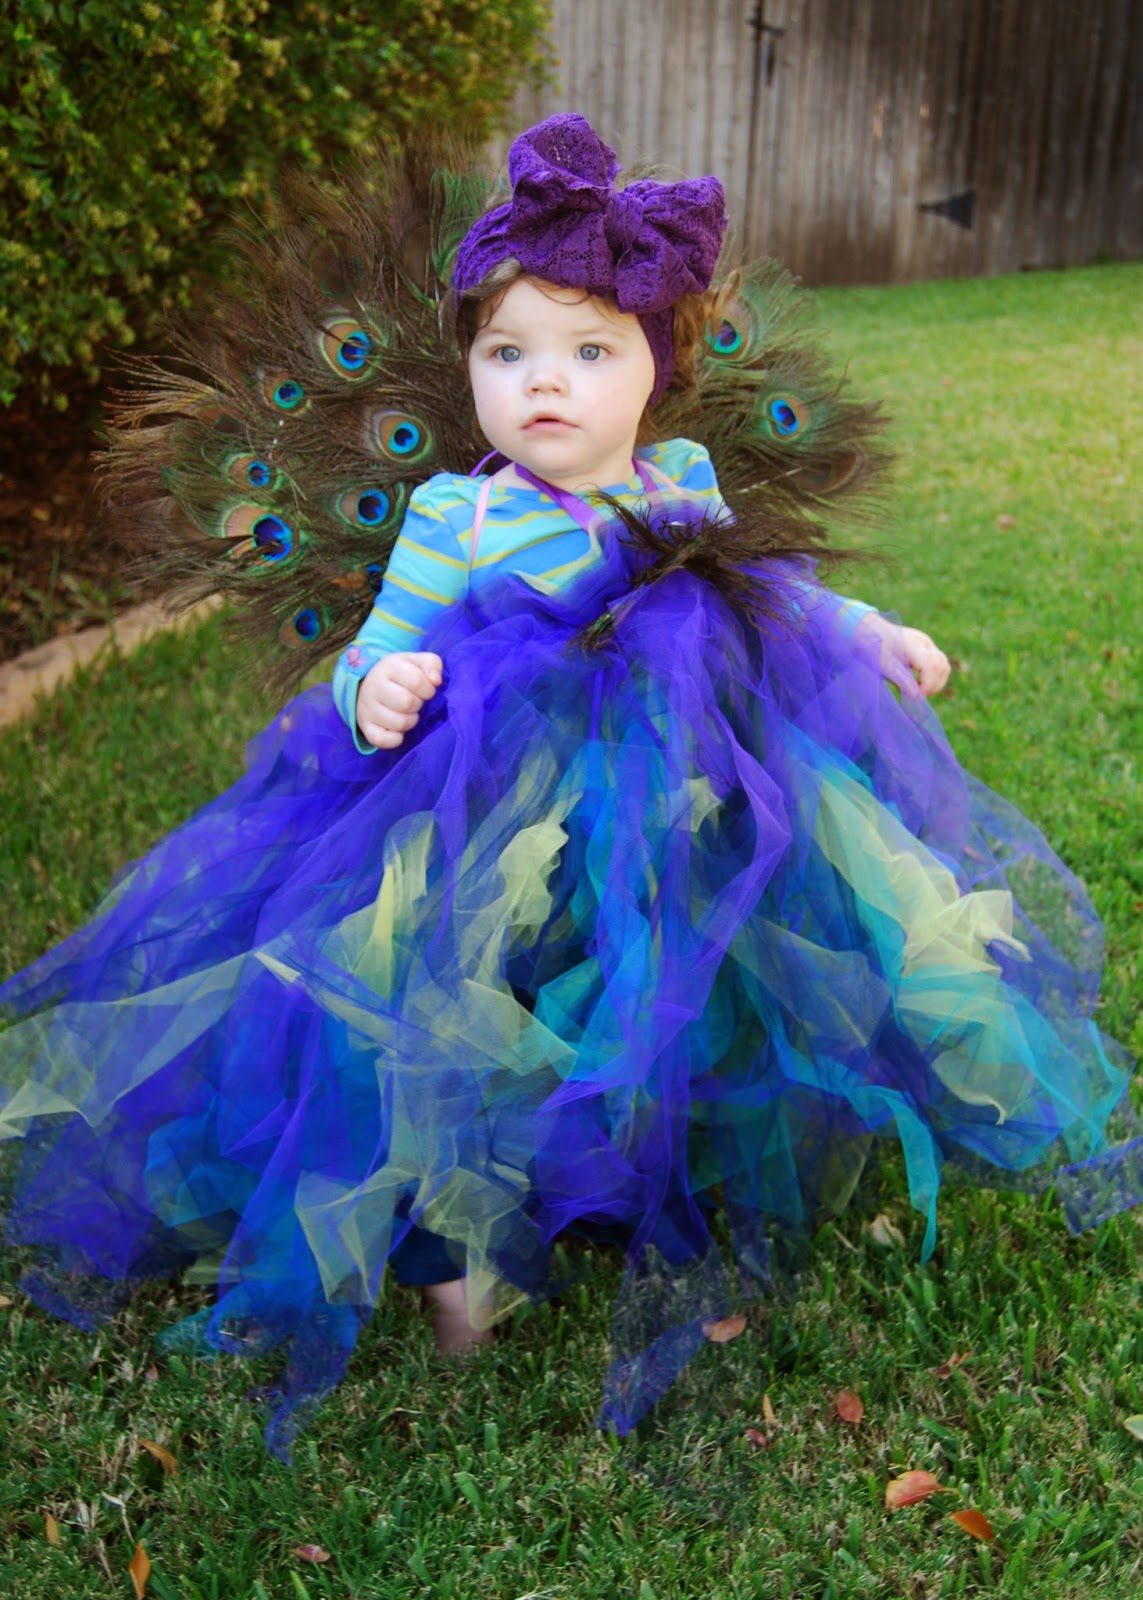 Momfessionals: Show and Tell Tuesday: Costumes!